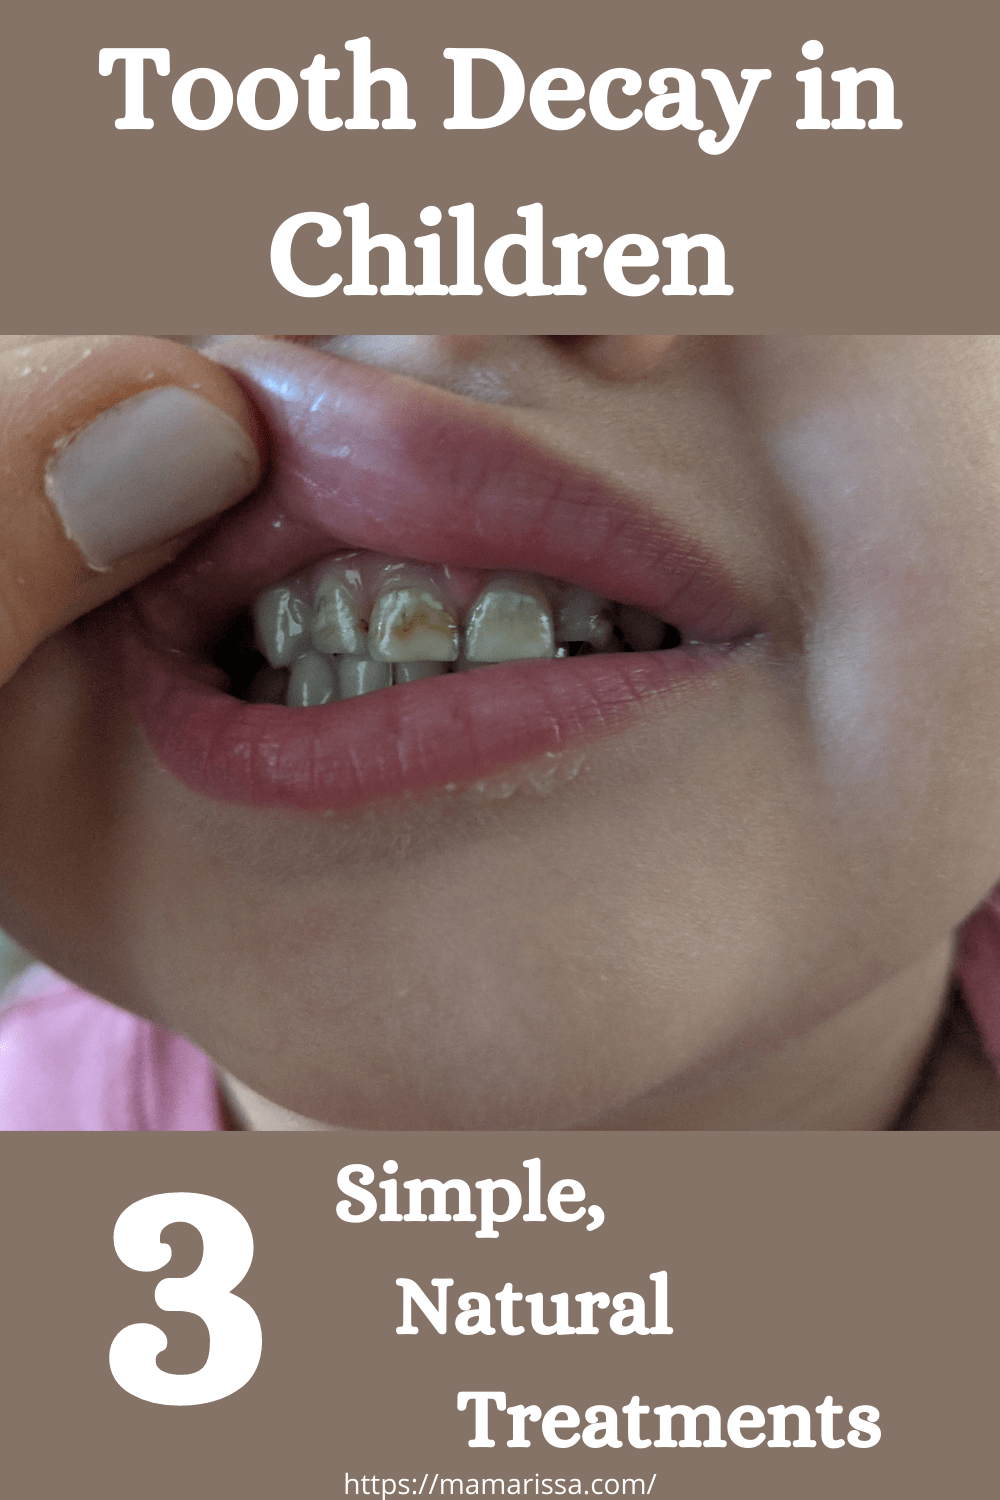 Tooth Decay in Children: 3 Simple, Natural Treatments